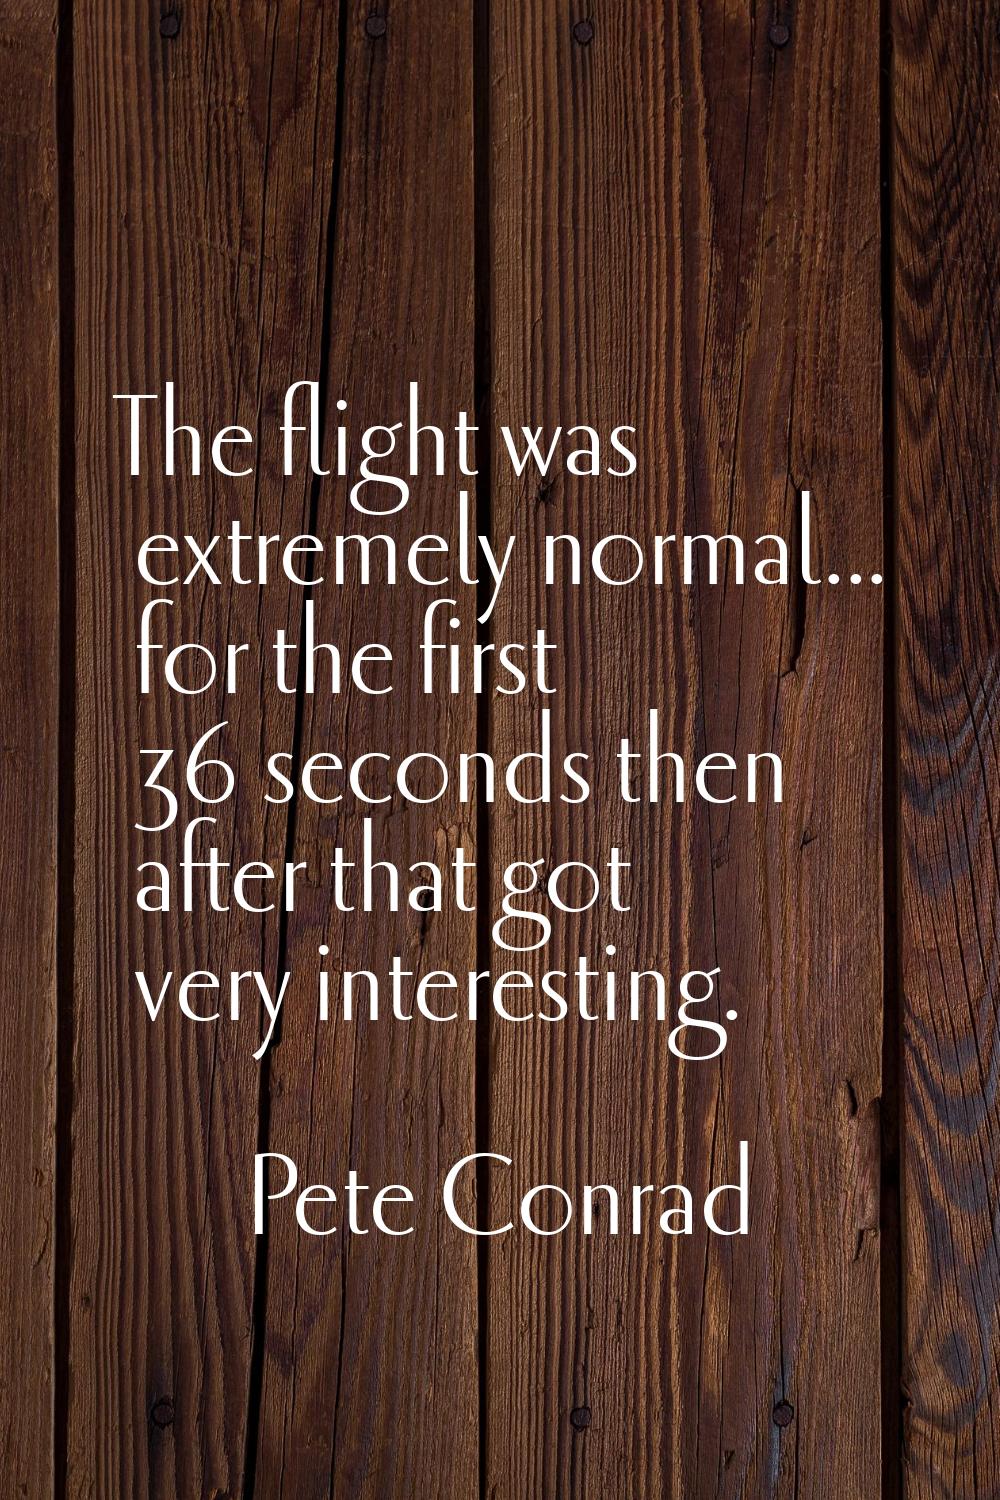 The flight was extremely normal... for the first 36 seconds then after that got very interesting.